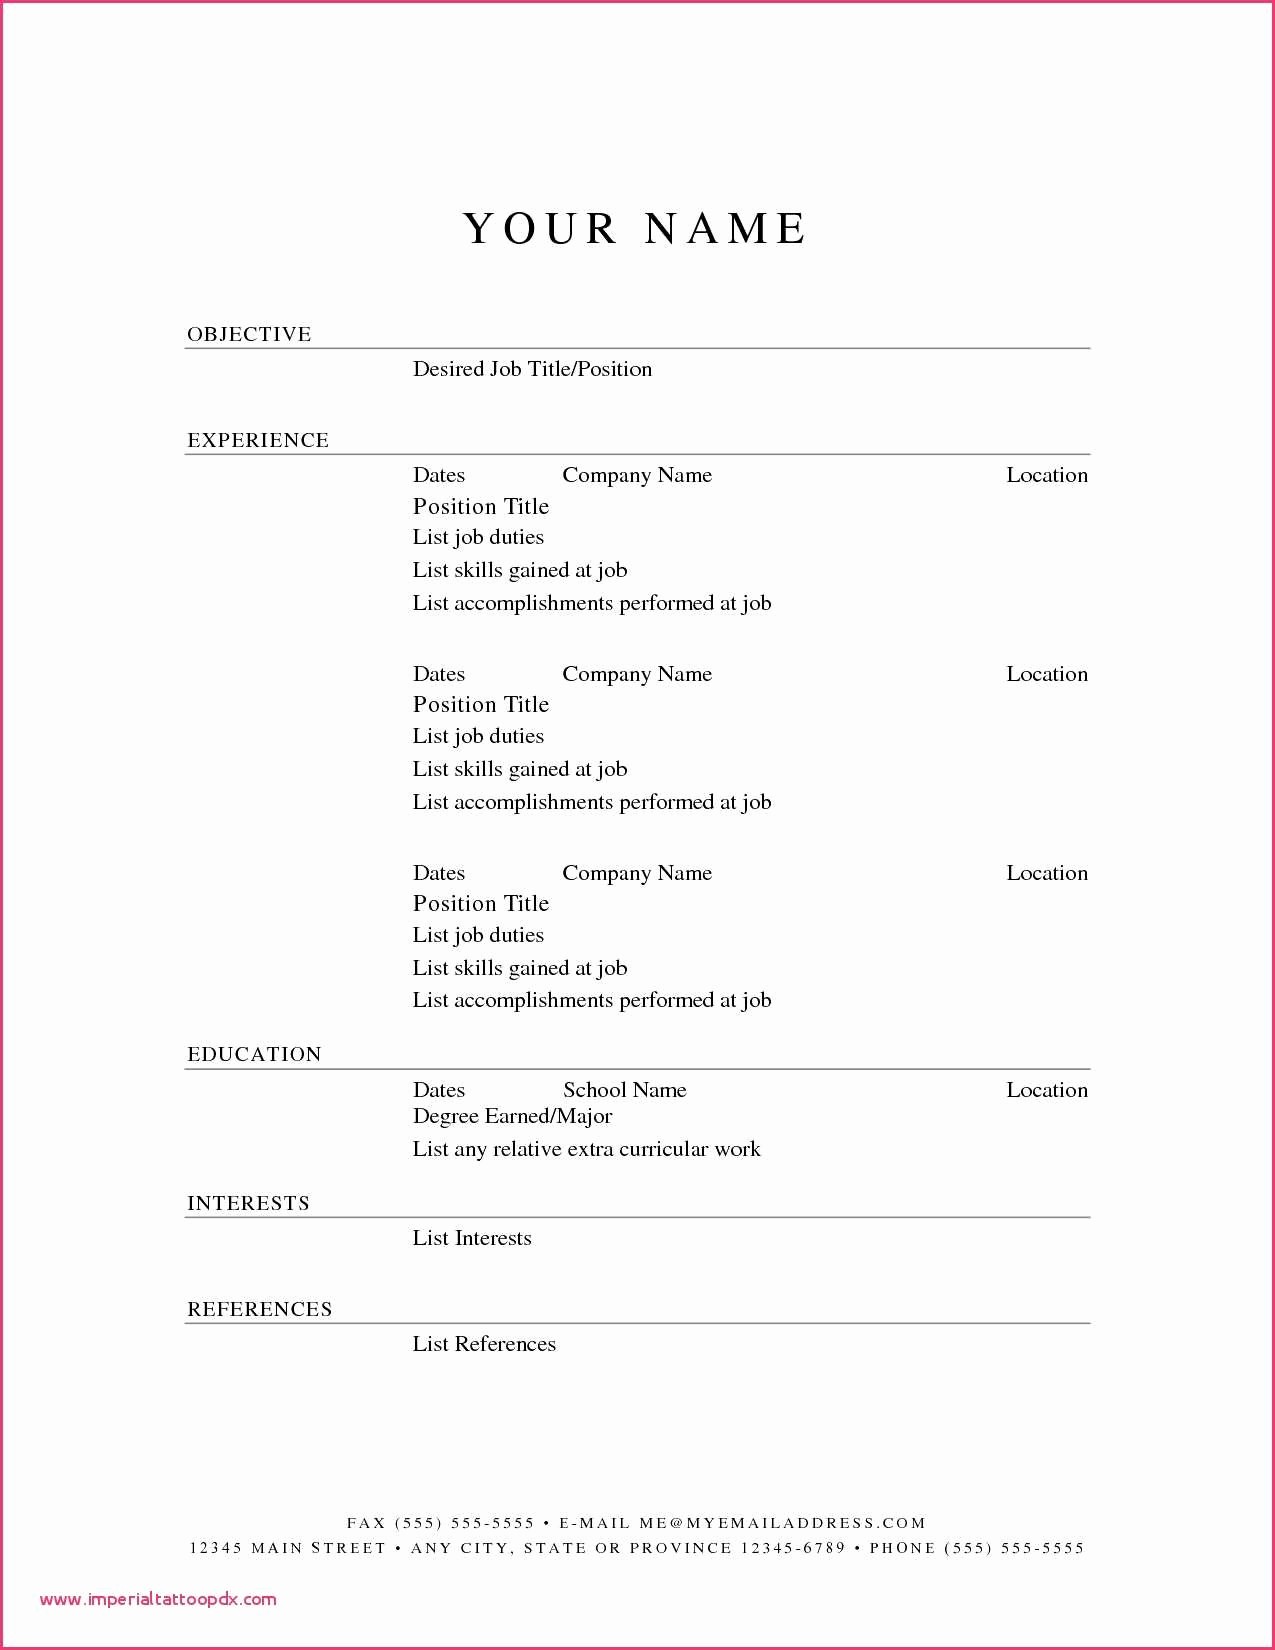 Resume Template On Word 2007 New 46 Resume Template Download for Microsoft Word 2007